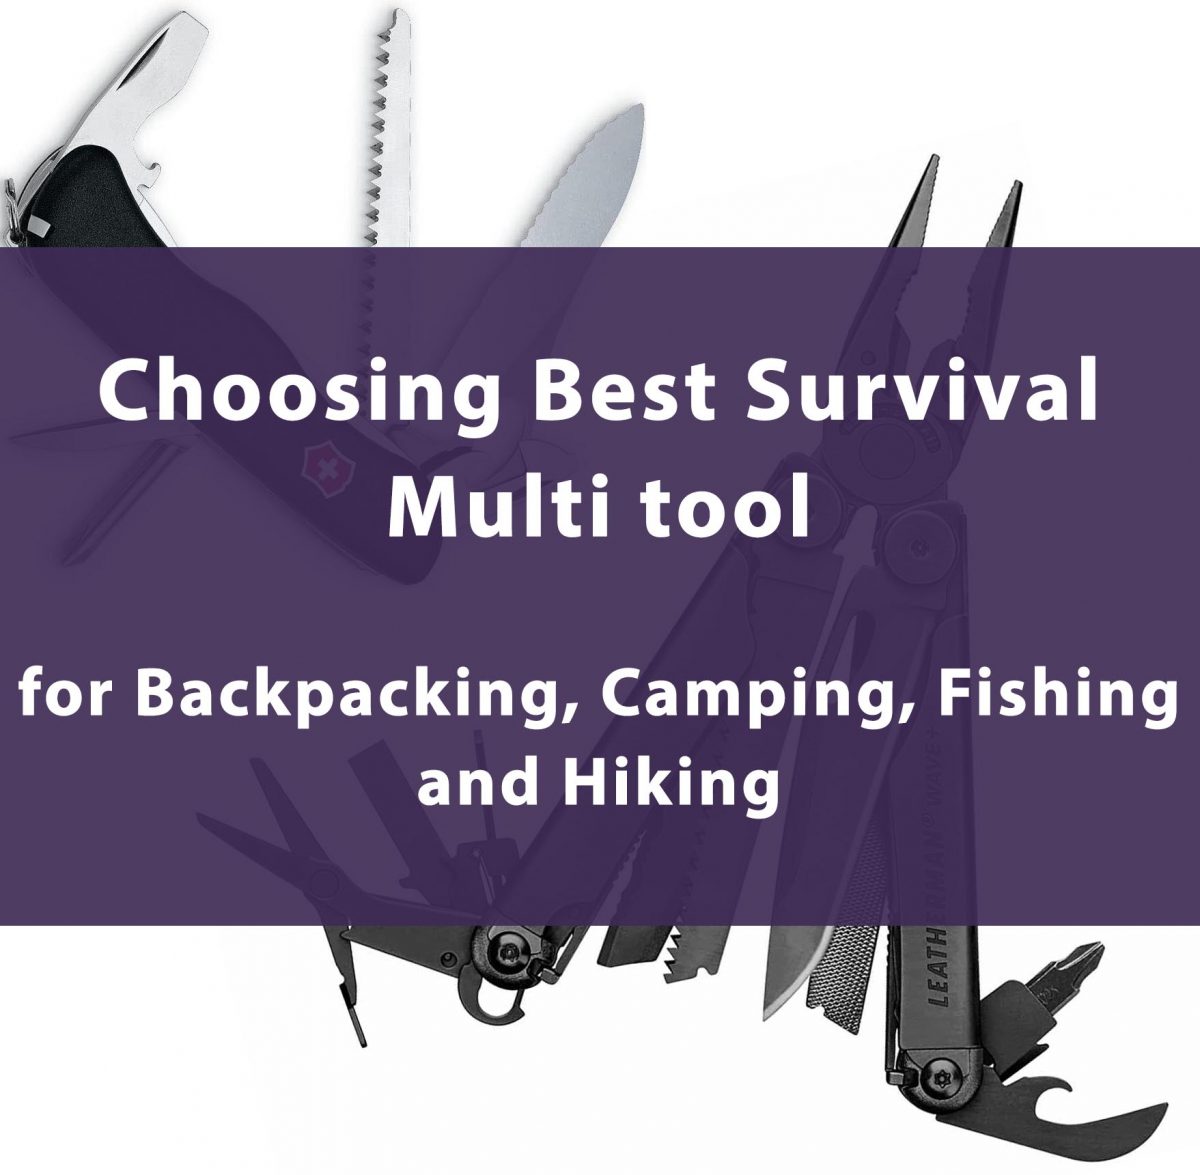 Choosing Best Survival Multi Tool for Backpacking,Camping, Fishing, Hiking